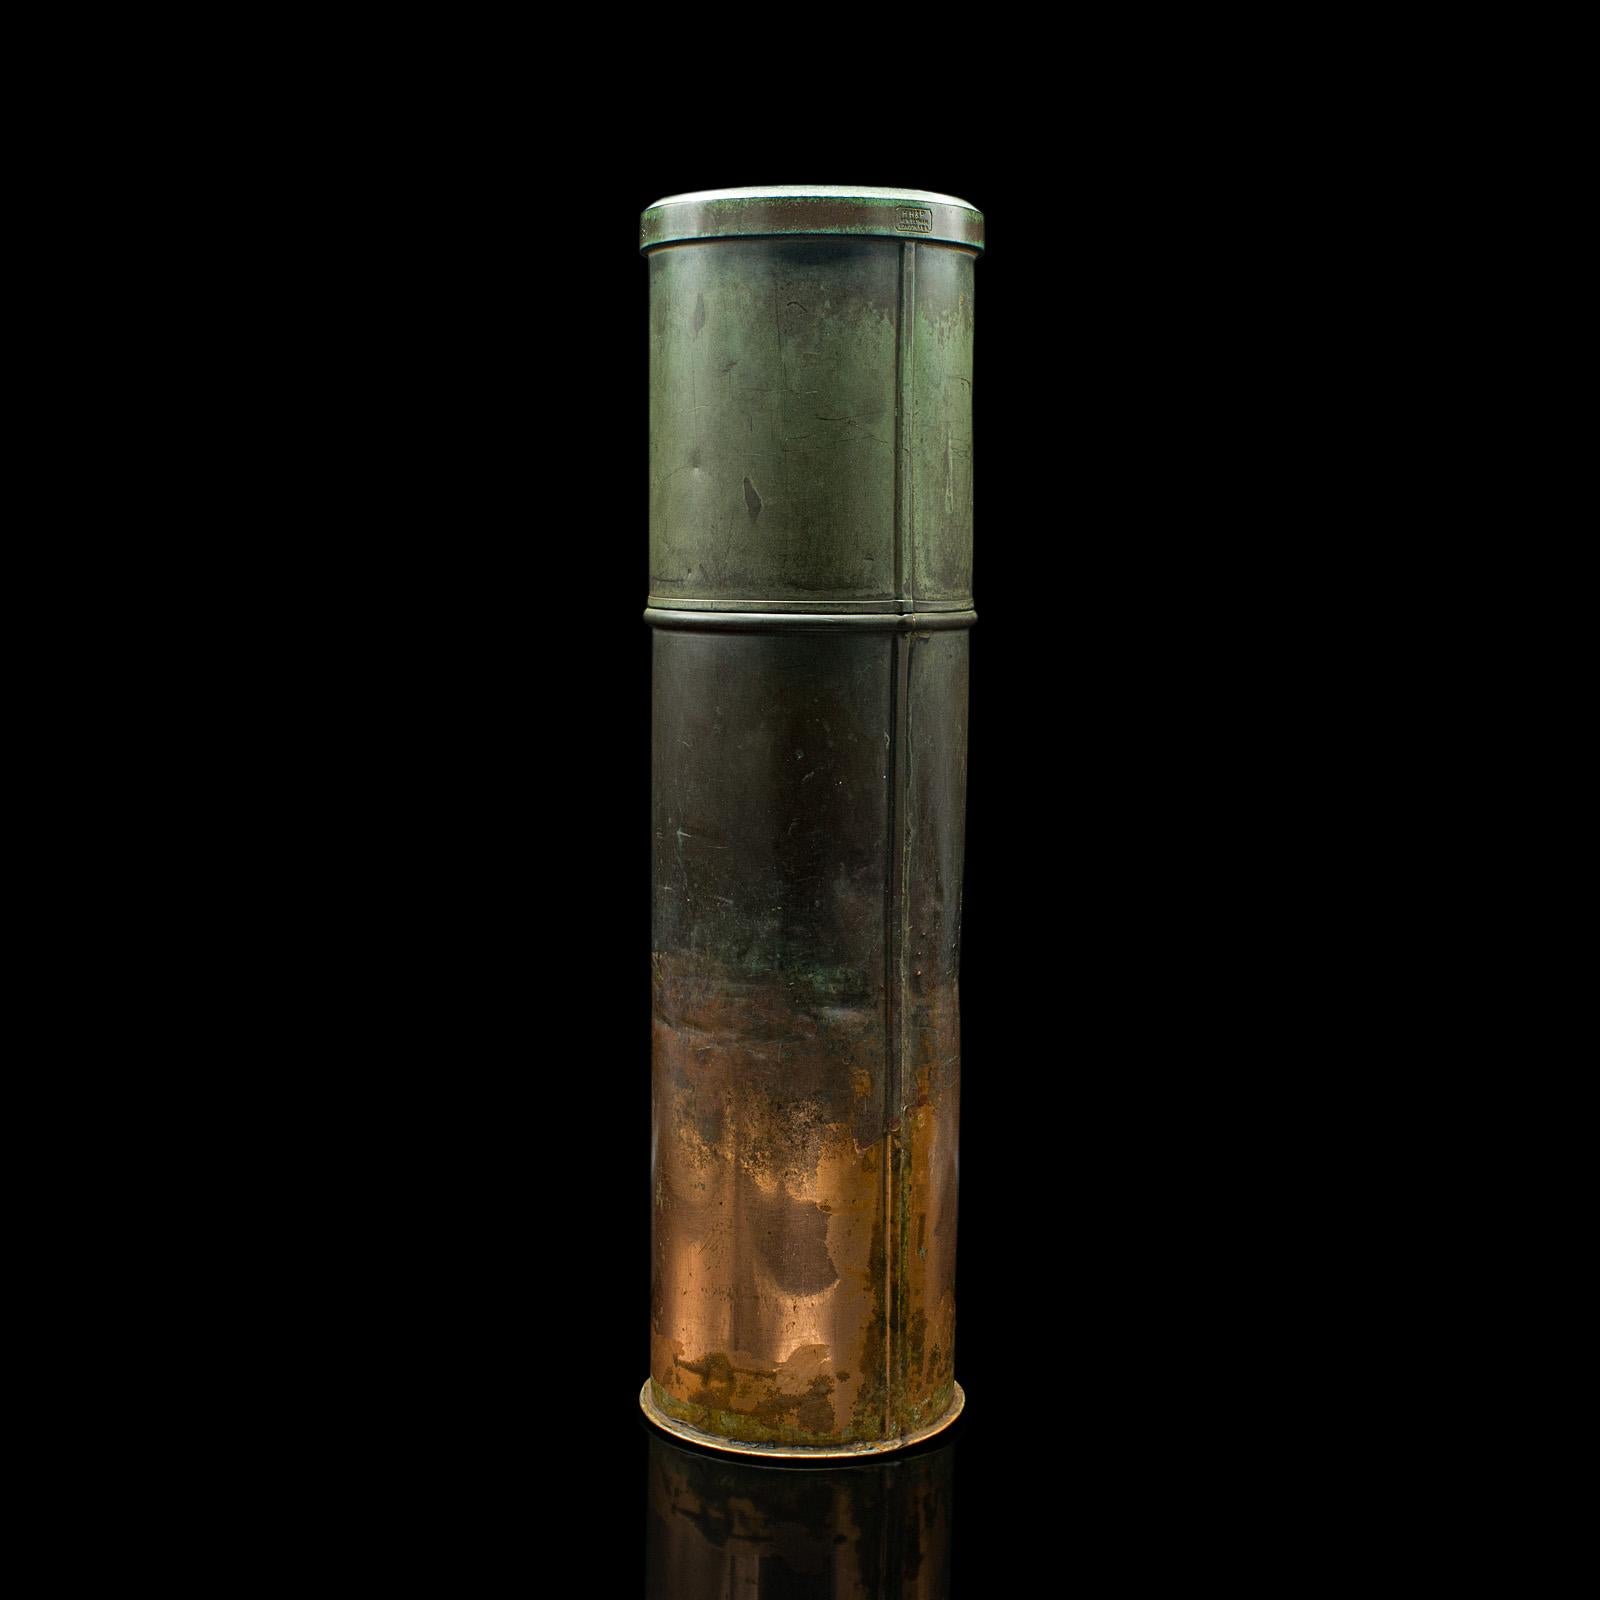 This is an antique pluviometer set. An English, copper and glass meteorological rain gauge, dating to the Victorian period and later, circa 1900.

Fascinating and comprehensive rain measurement device
Displaying a desirable aged patina - finely